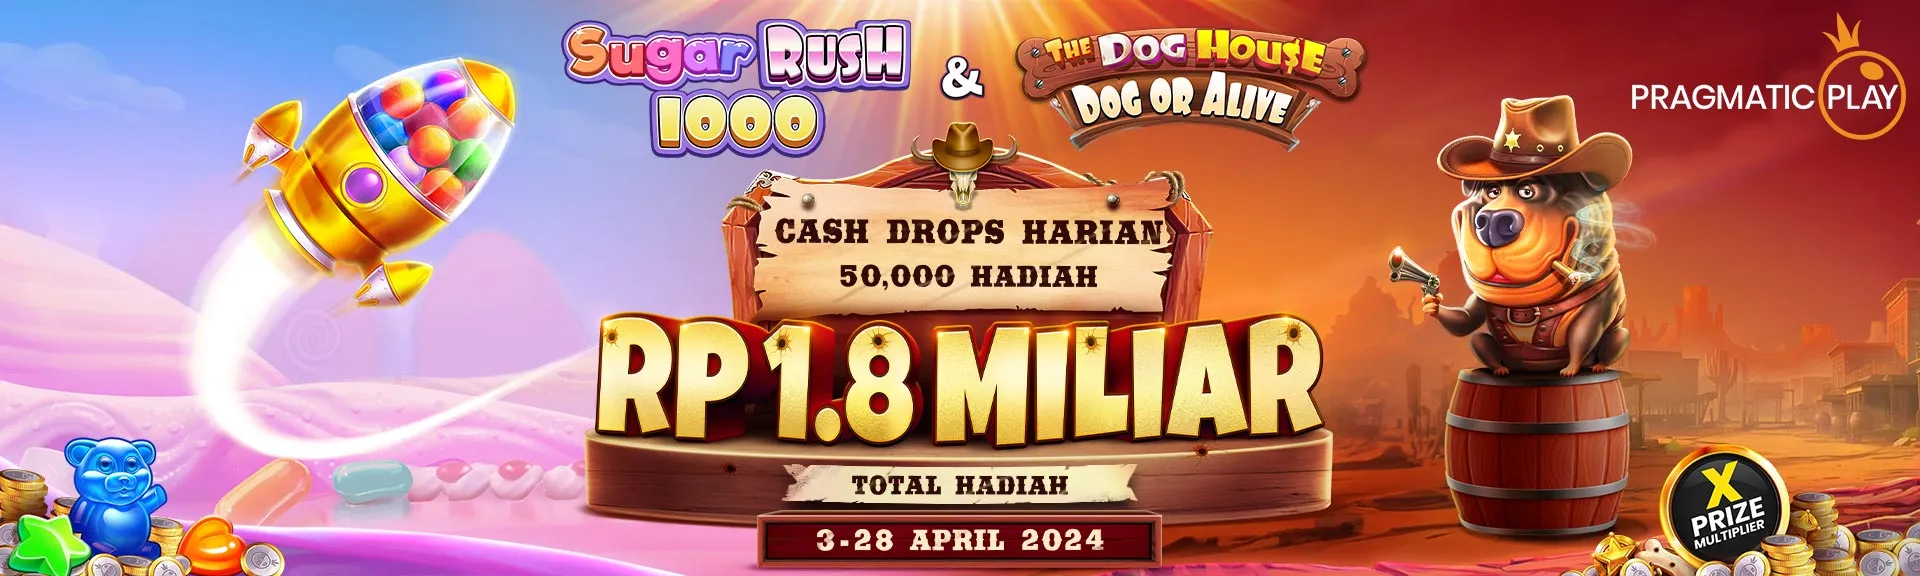 PP_SugarRush1000&TheDogHouseDailyCashDrops_20240402